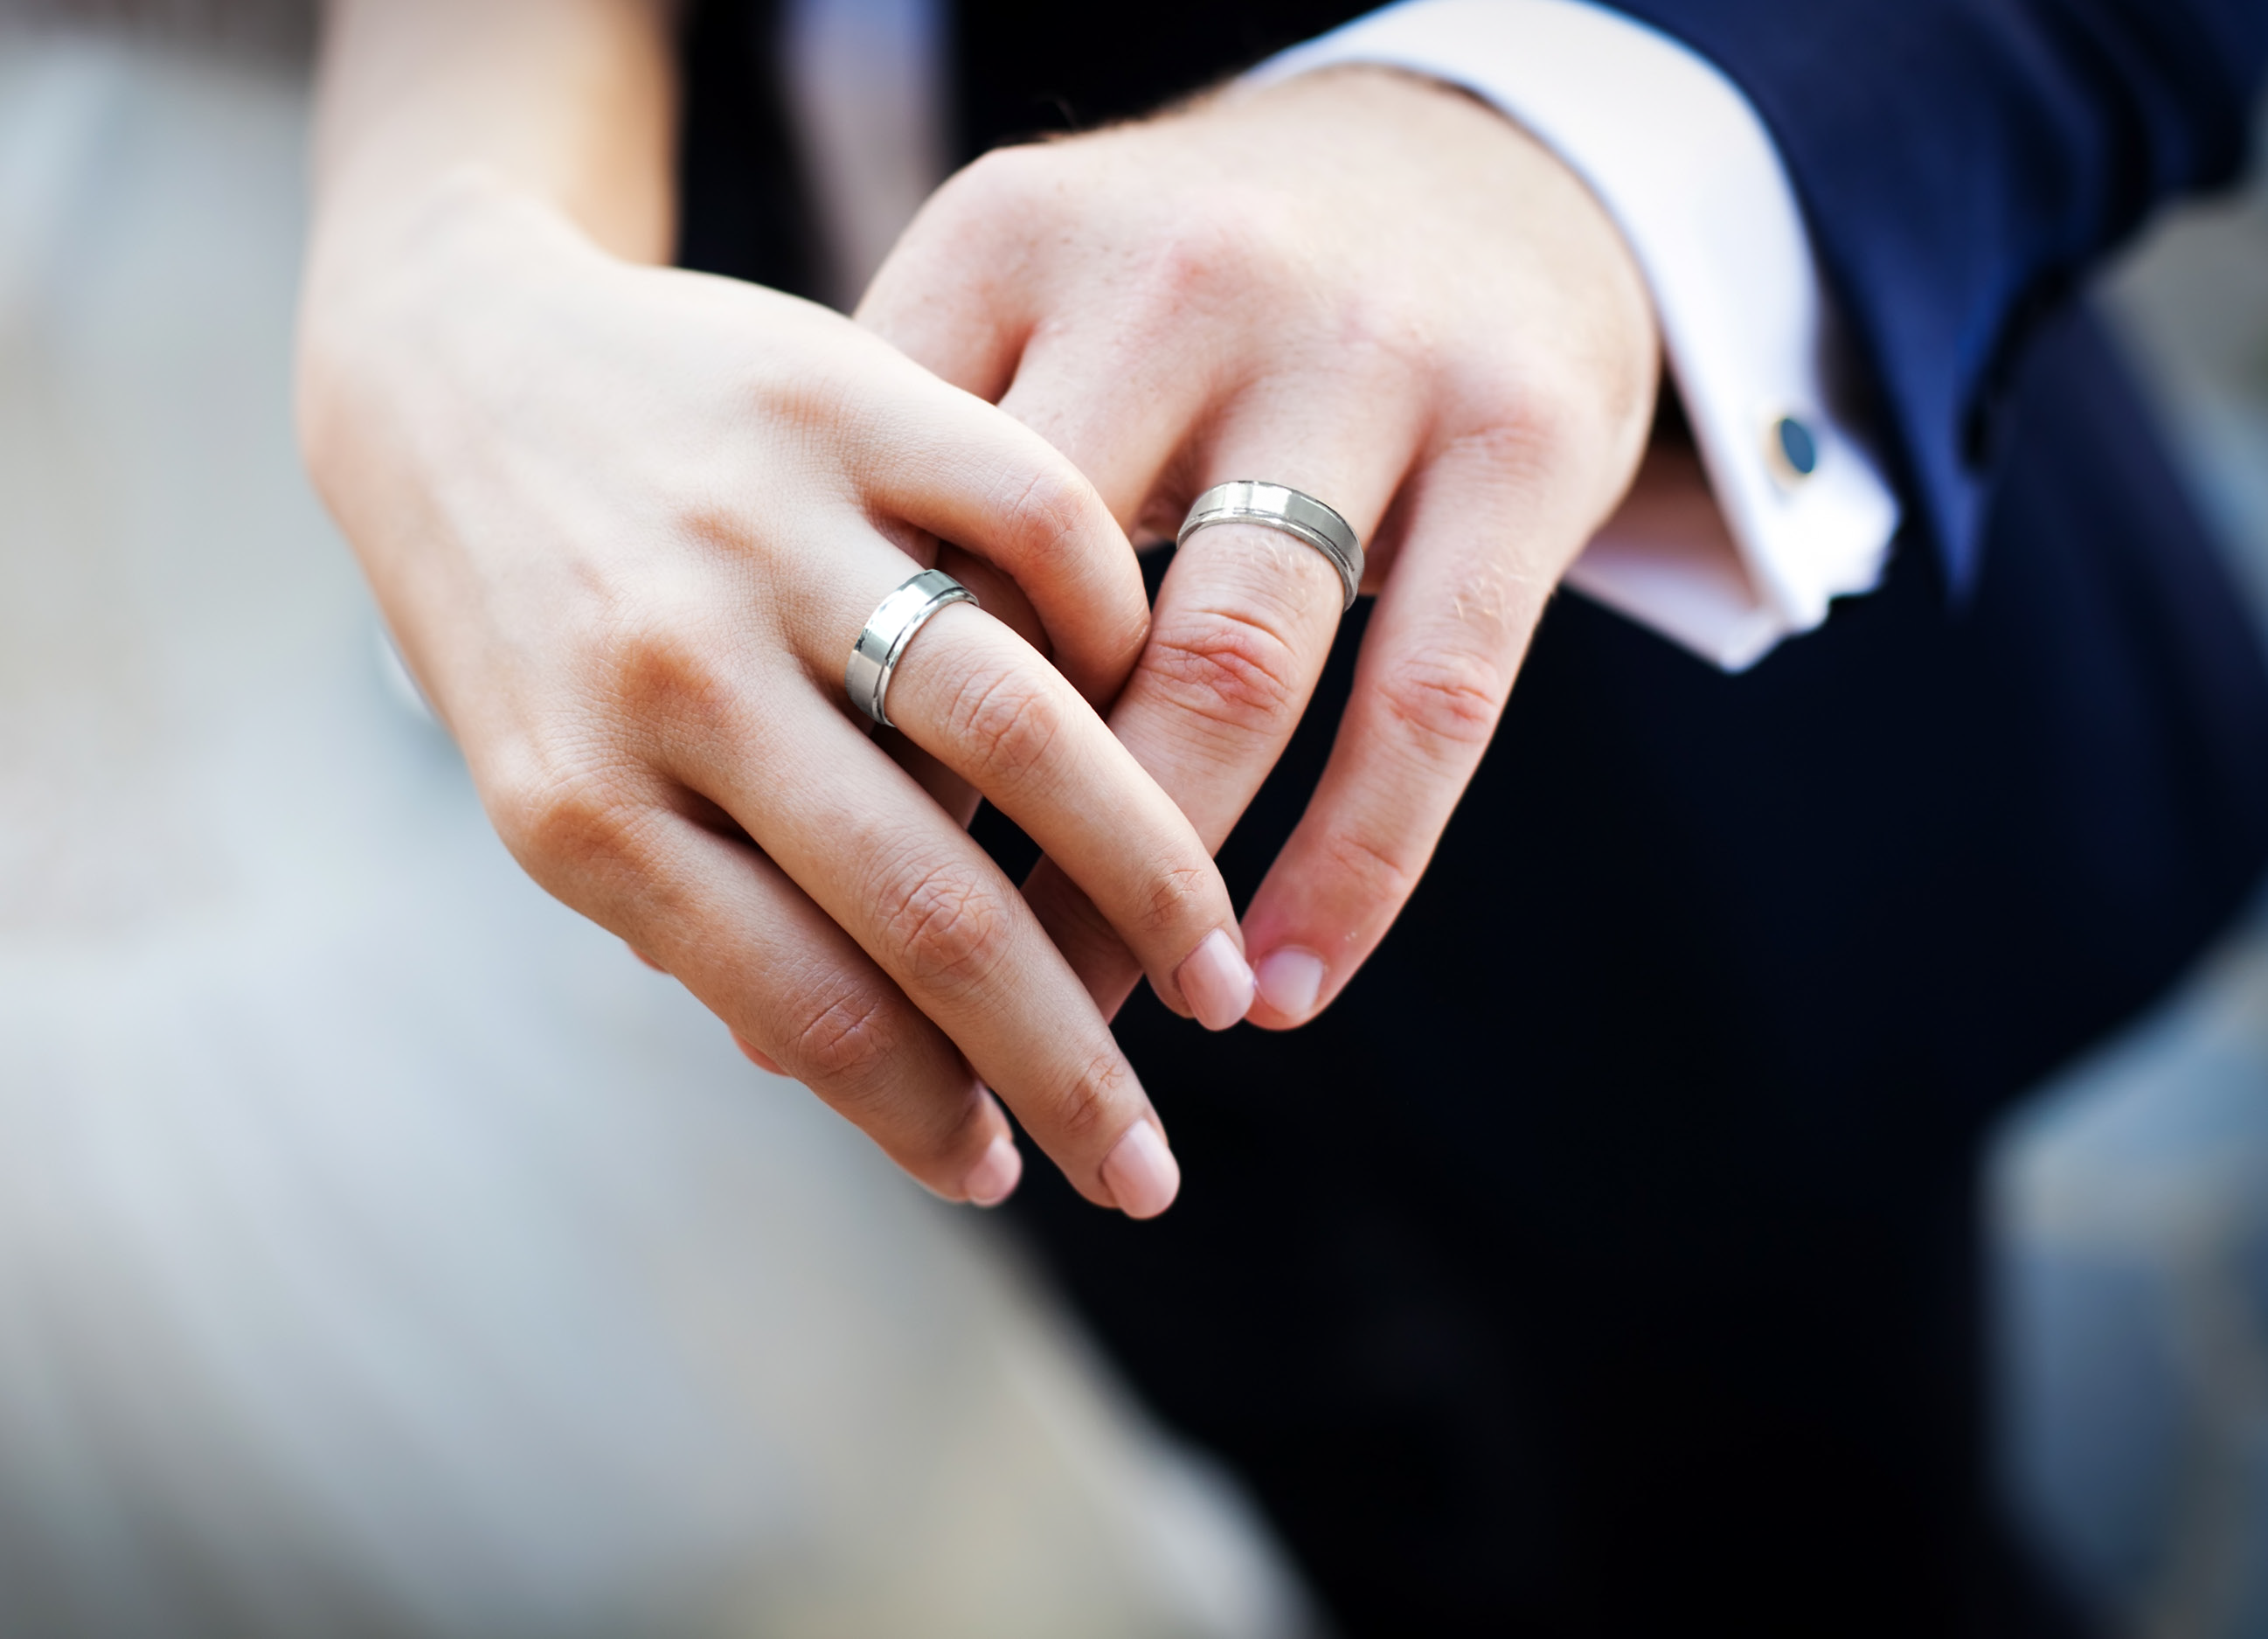 I Stopped Wearing My Wedding Ring And Had A Marriage Epiphany | YourTango